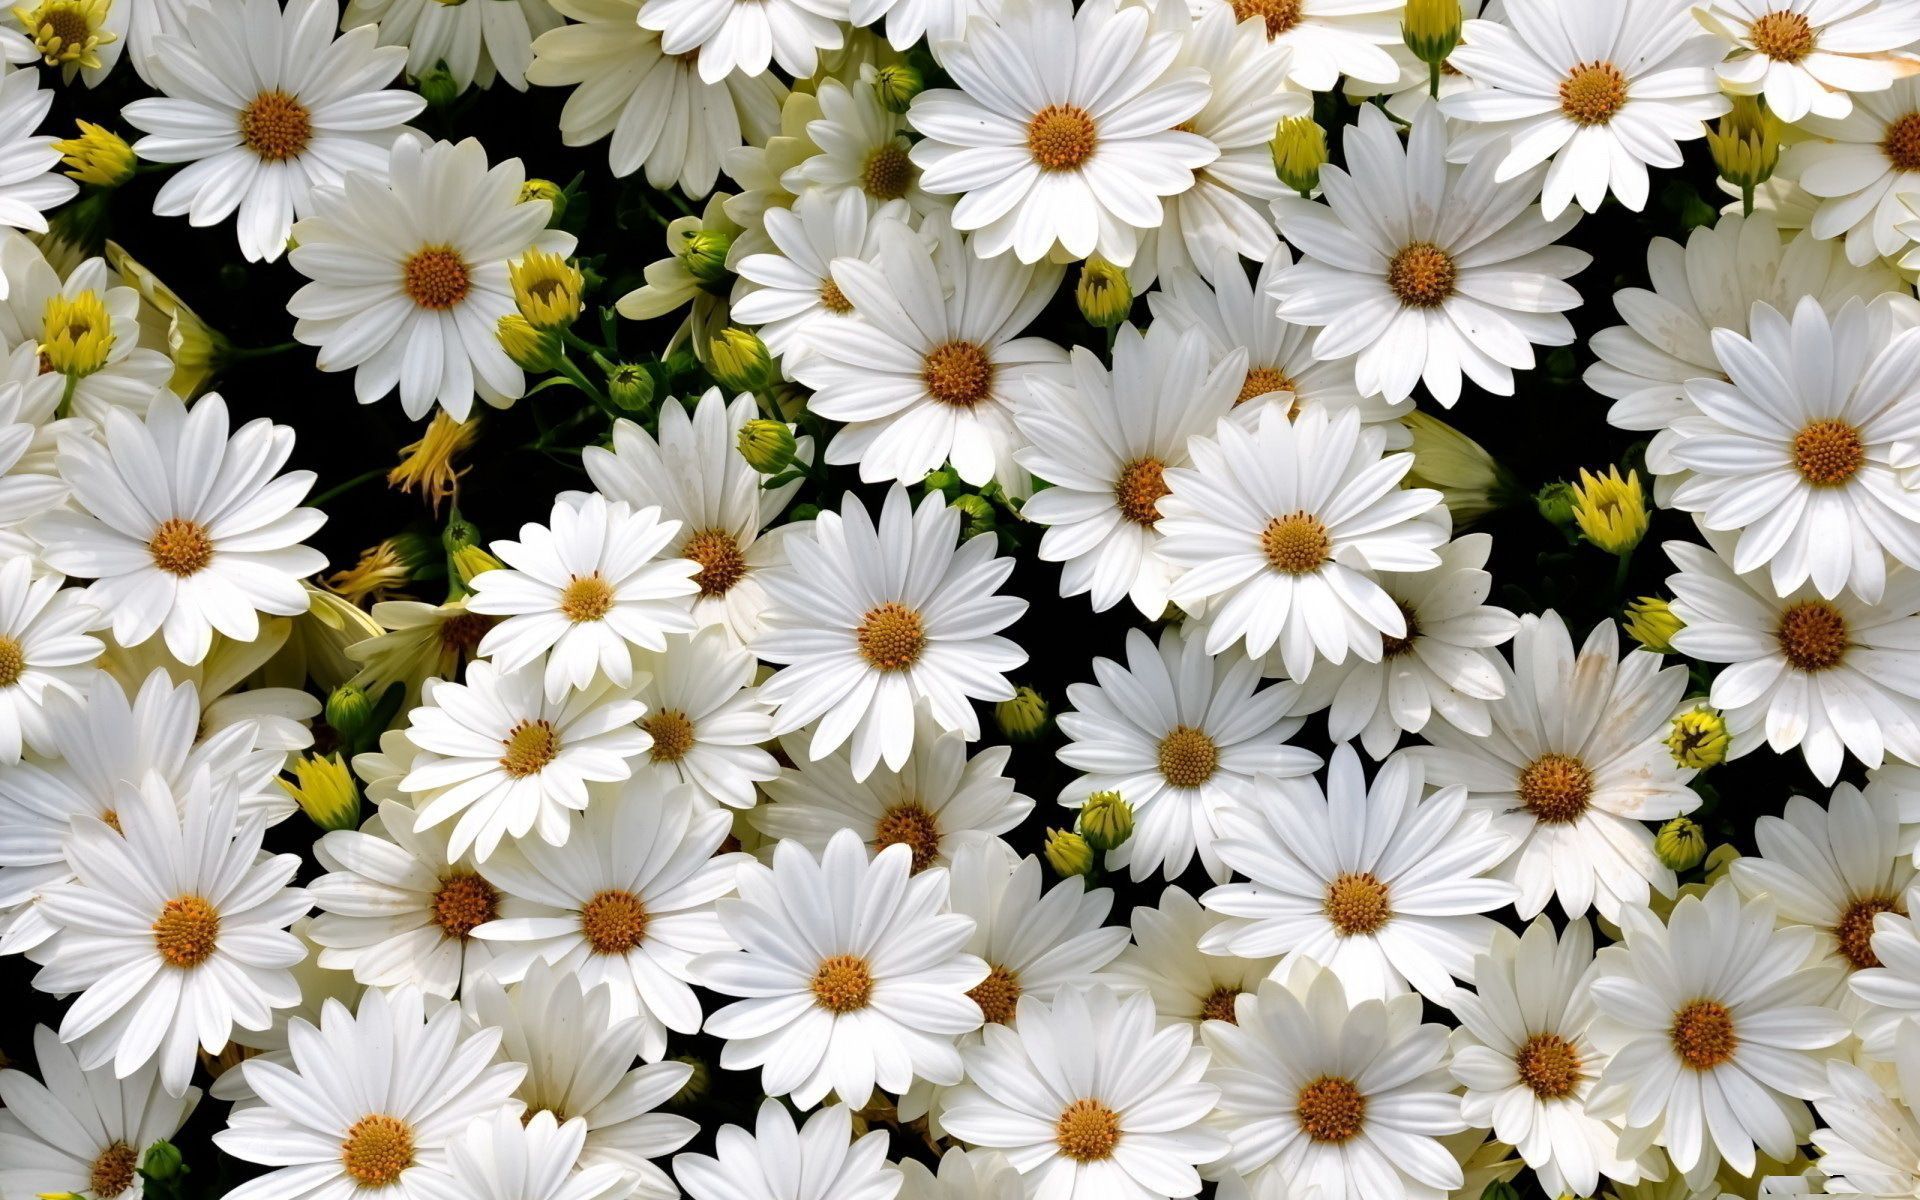 A bunch of white daisies in a field. - Daisy